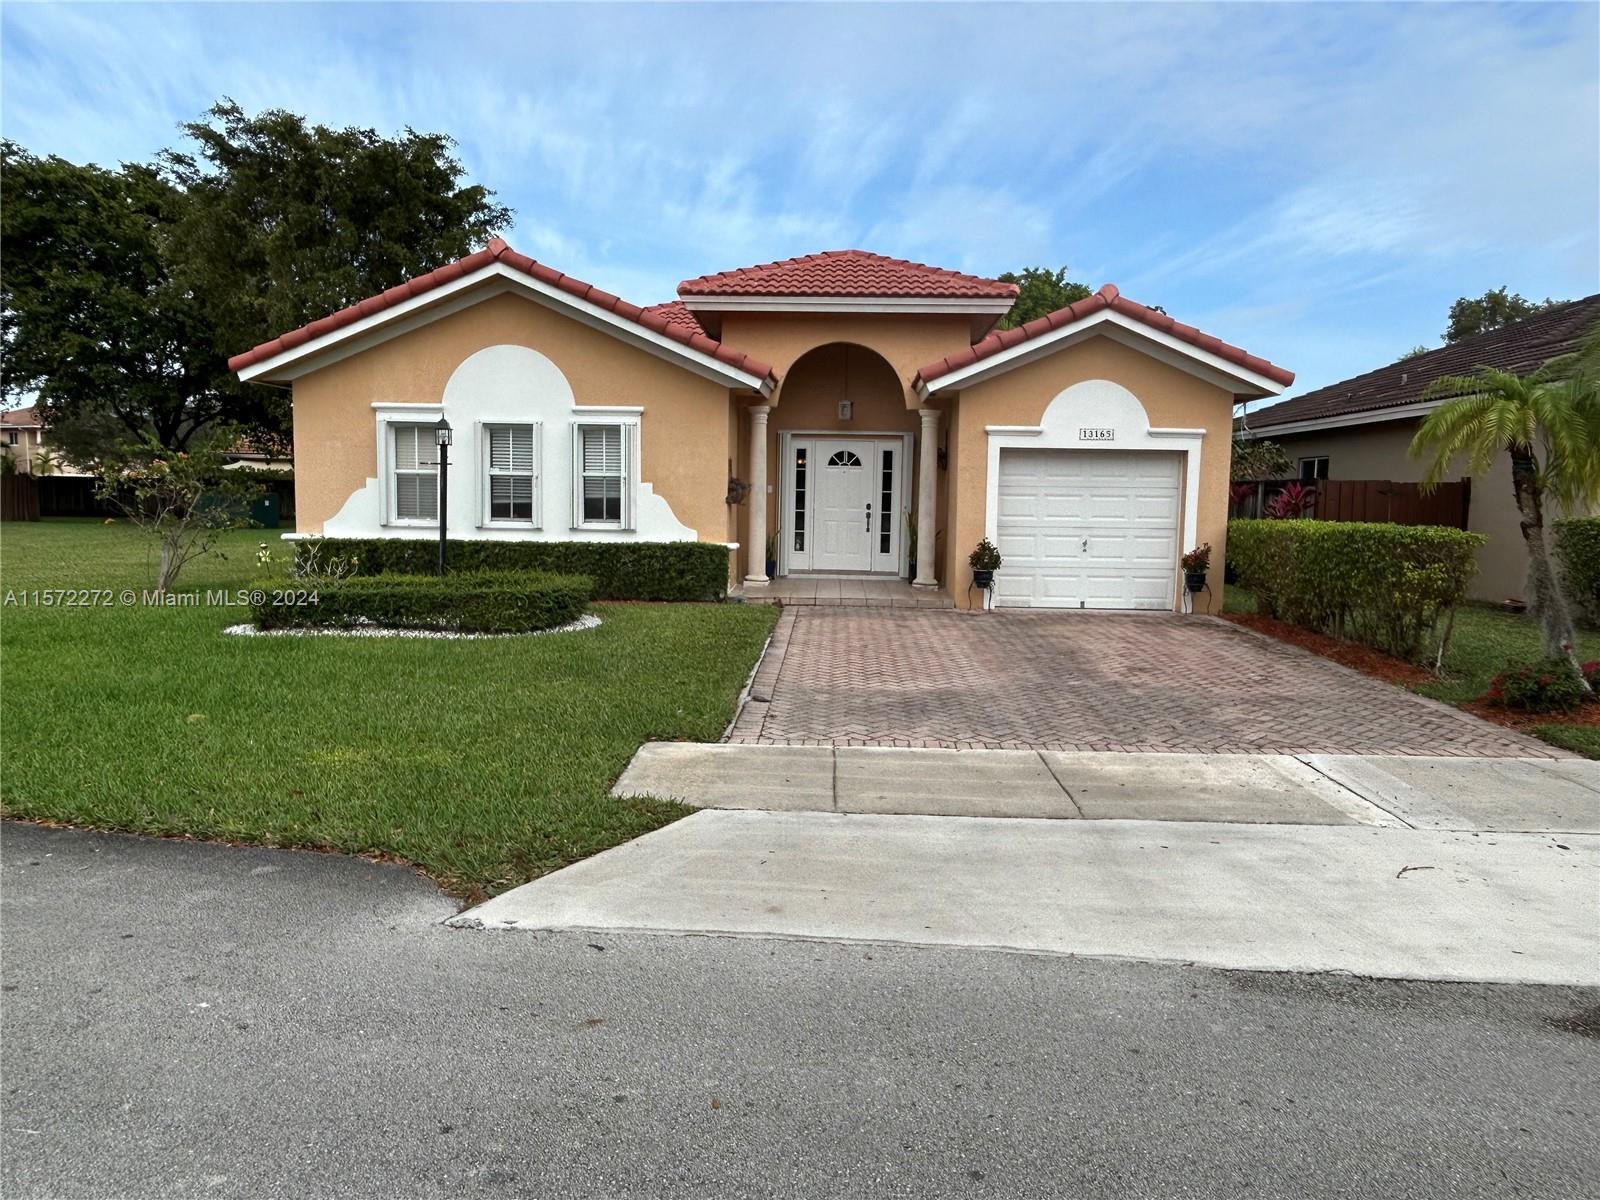 Property for Sale at 13165 Sw 142 Ter Ter, Miami, Broward County, Florida - Bedrooms: 3 
Bathrooms: 2  - $675,000